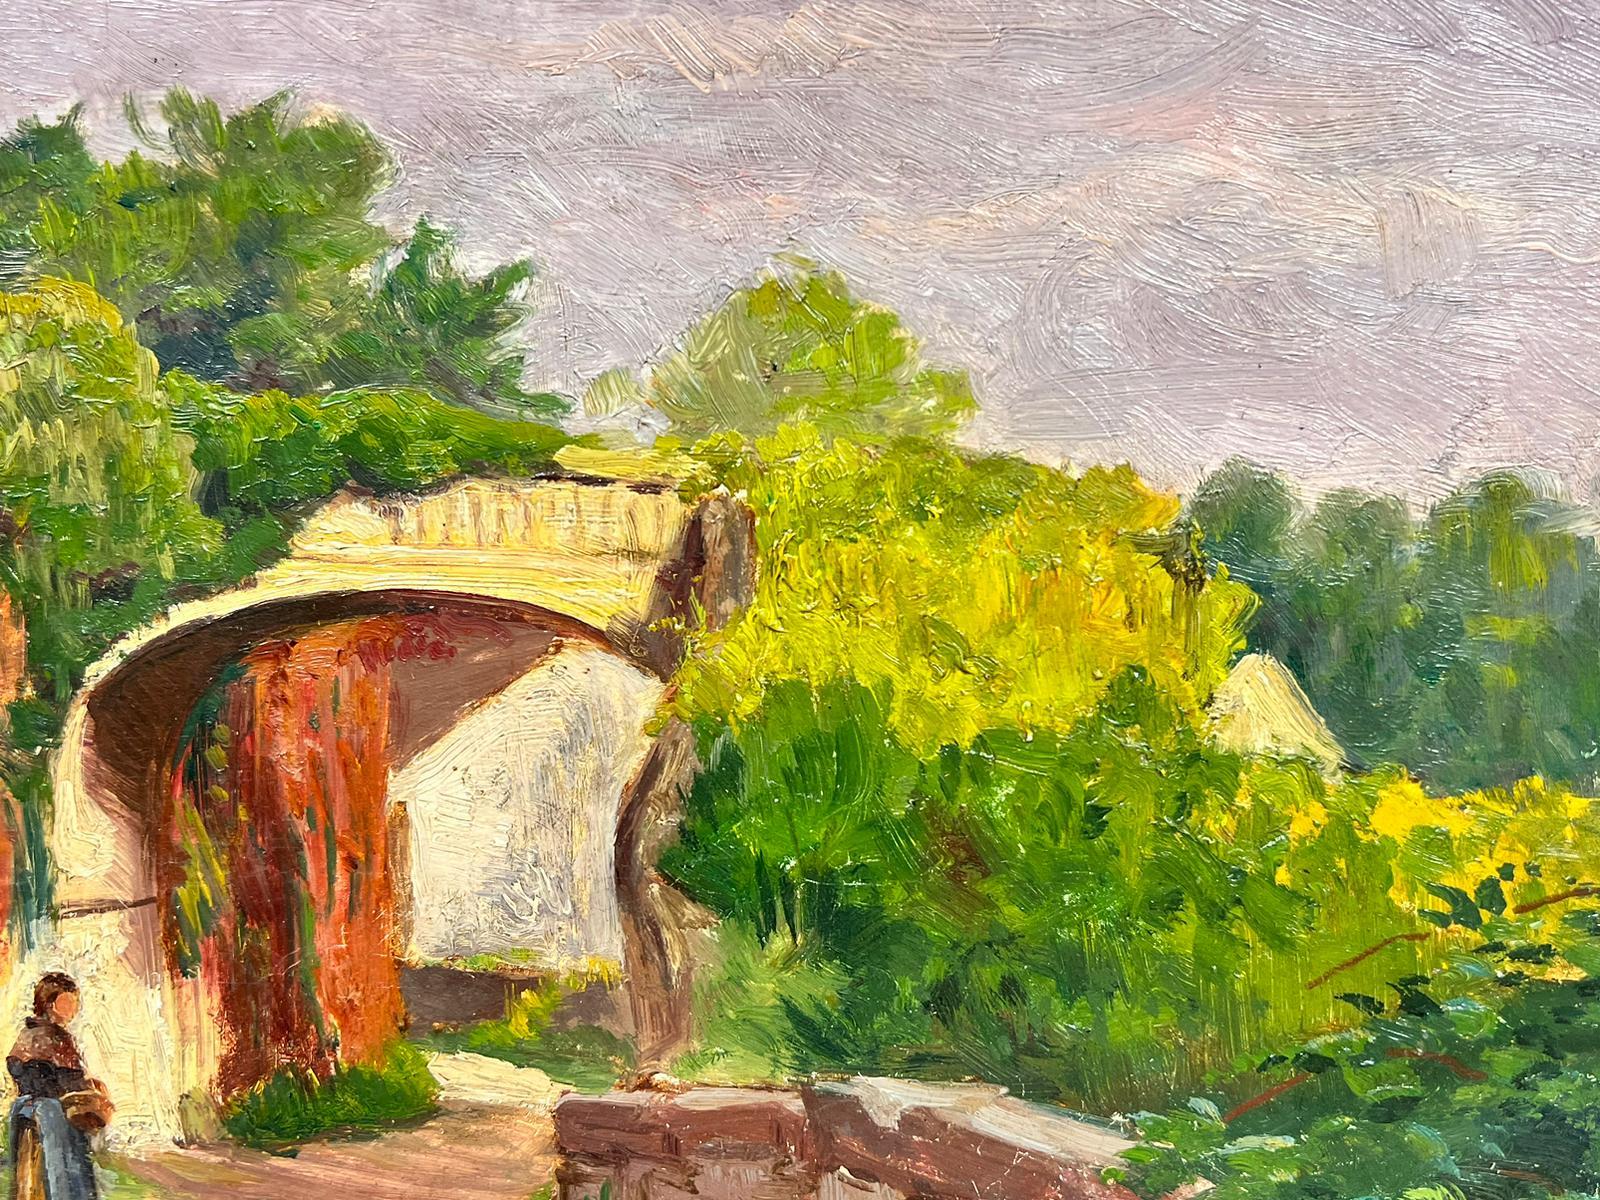 French Impressionist painter, early 1900’s
oil painting on canvas, unframed
painting: 10 x 13 inches
provenance: private collection, France 
condition: overall very good, minor losses to edges